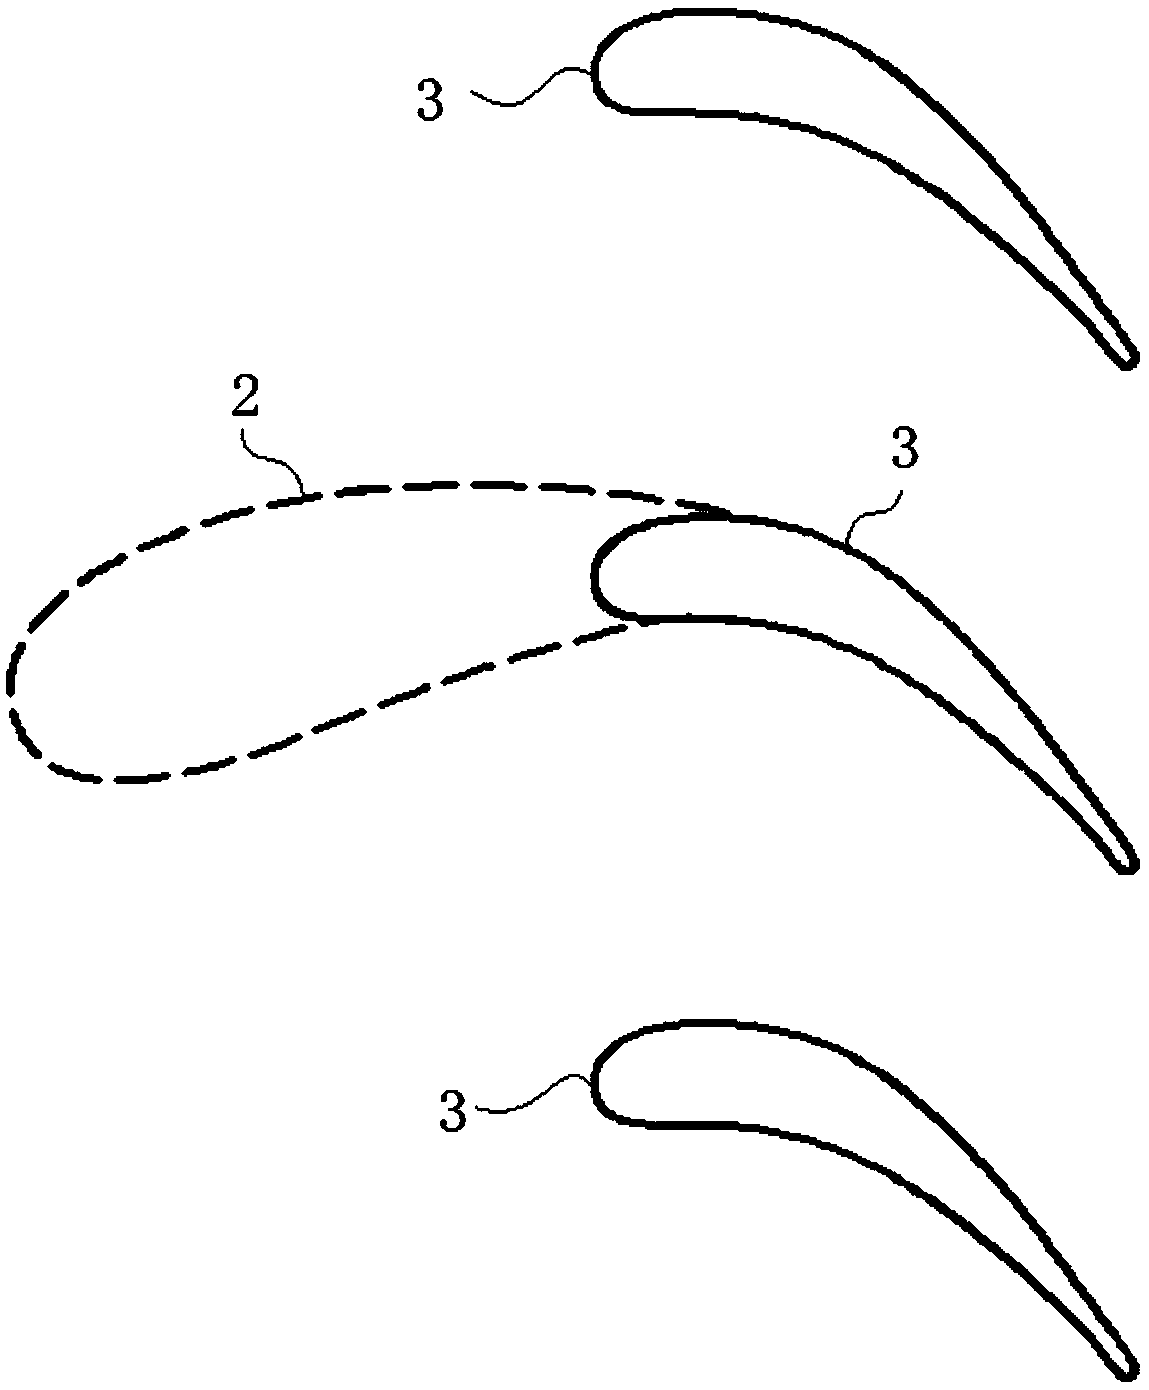 Blade type design method for axial-flow type turbine large and small blade combined blade lattice